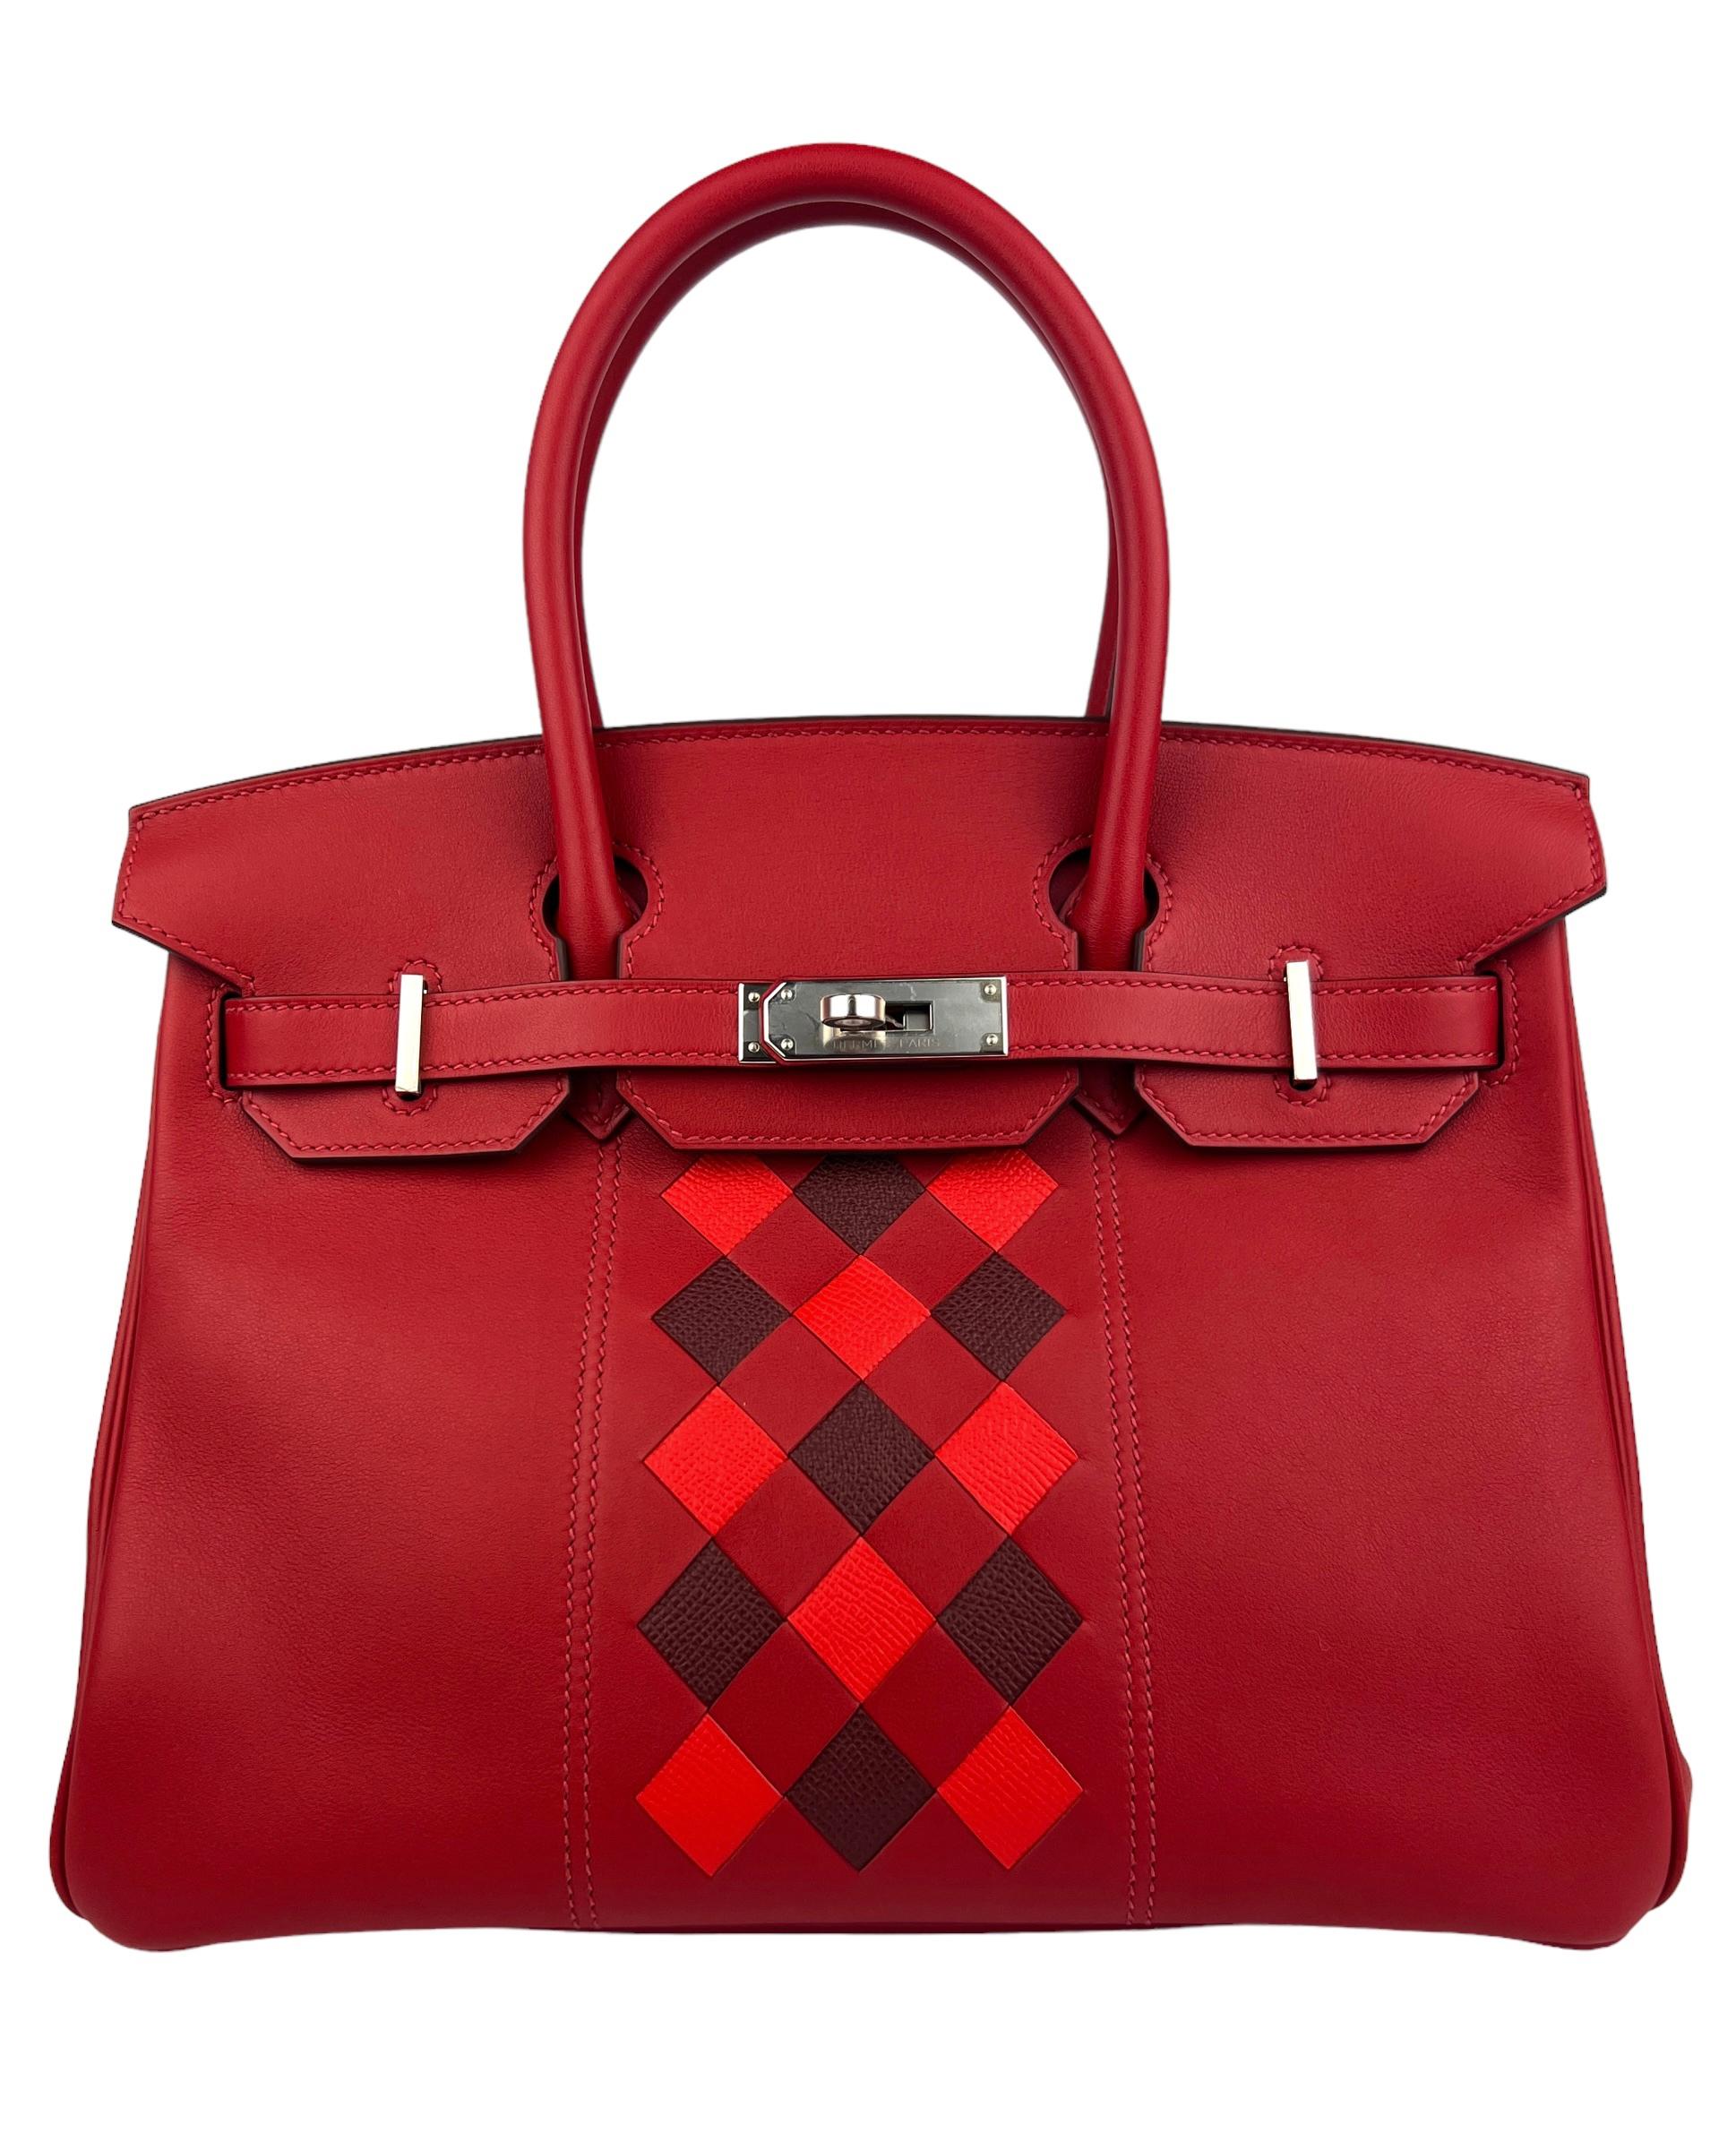 Like New Stunning Hermes Birkin Tressage Rouge de Coeur Rouge H Piment Red Swift and Epsom Leather Complimented by Palladium Hardware. D Stamp 2019. Like New Condition with Plastic on all hardware.

Shop with Confidence from Lux Addicts.